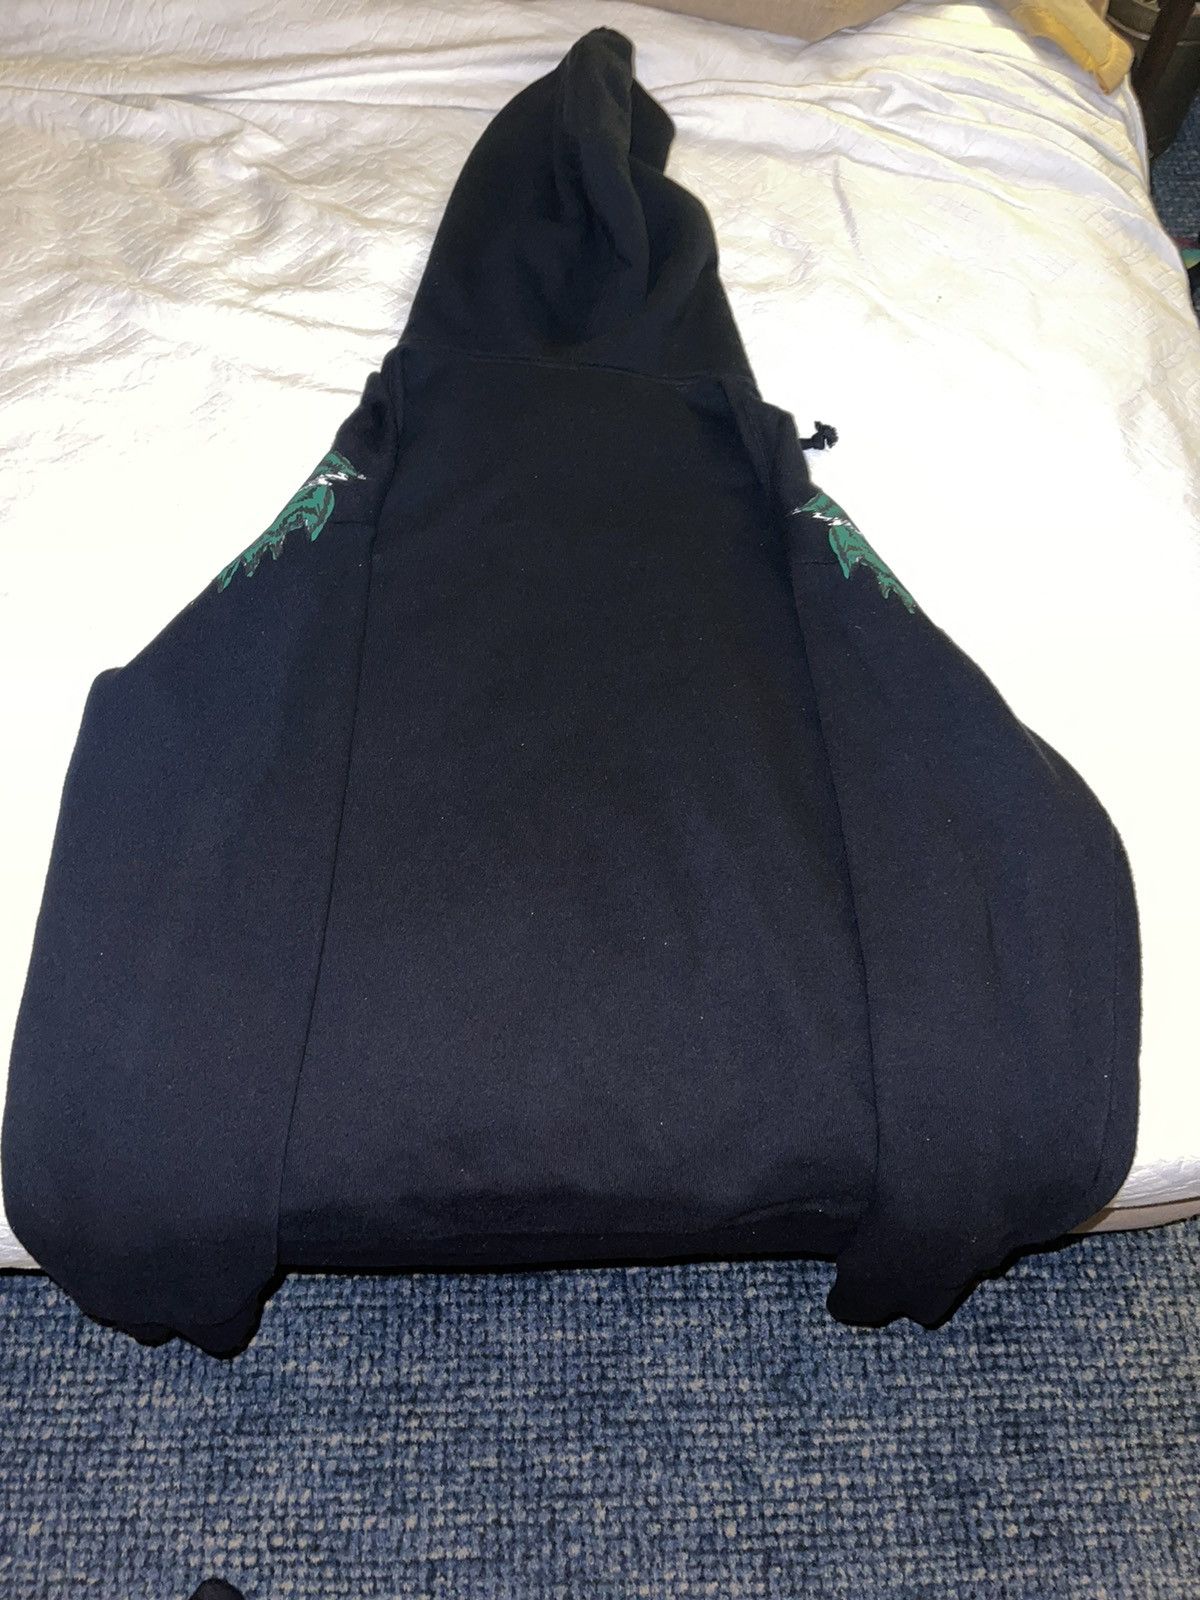 Gucci Gucci LOVED Hoodie Size US S / EU 44-46 / 1 - 4 Thumbnail